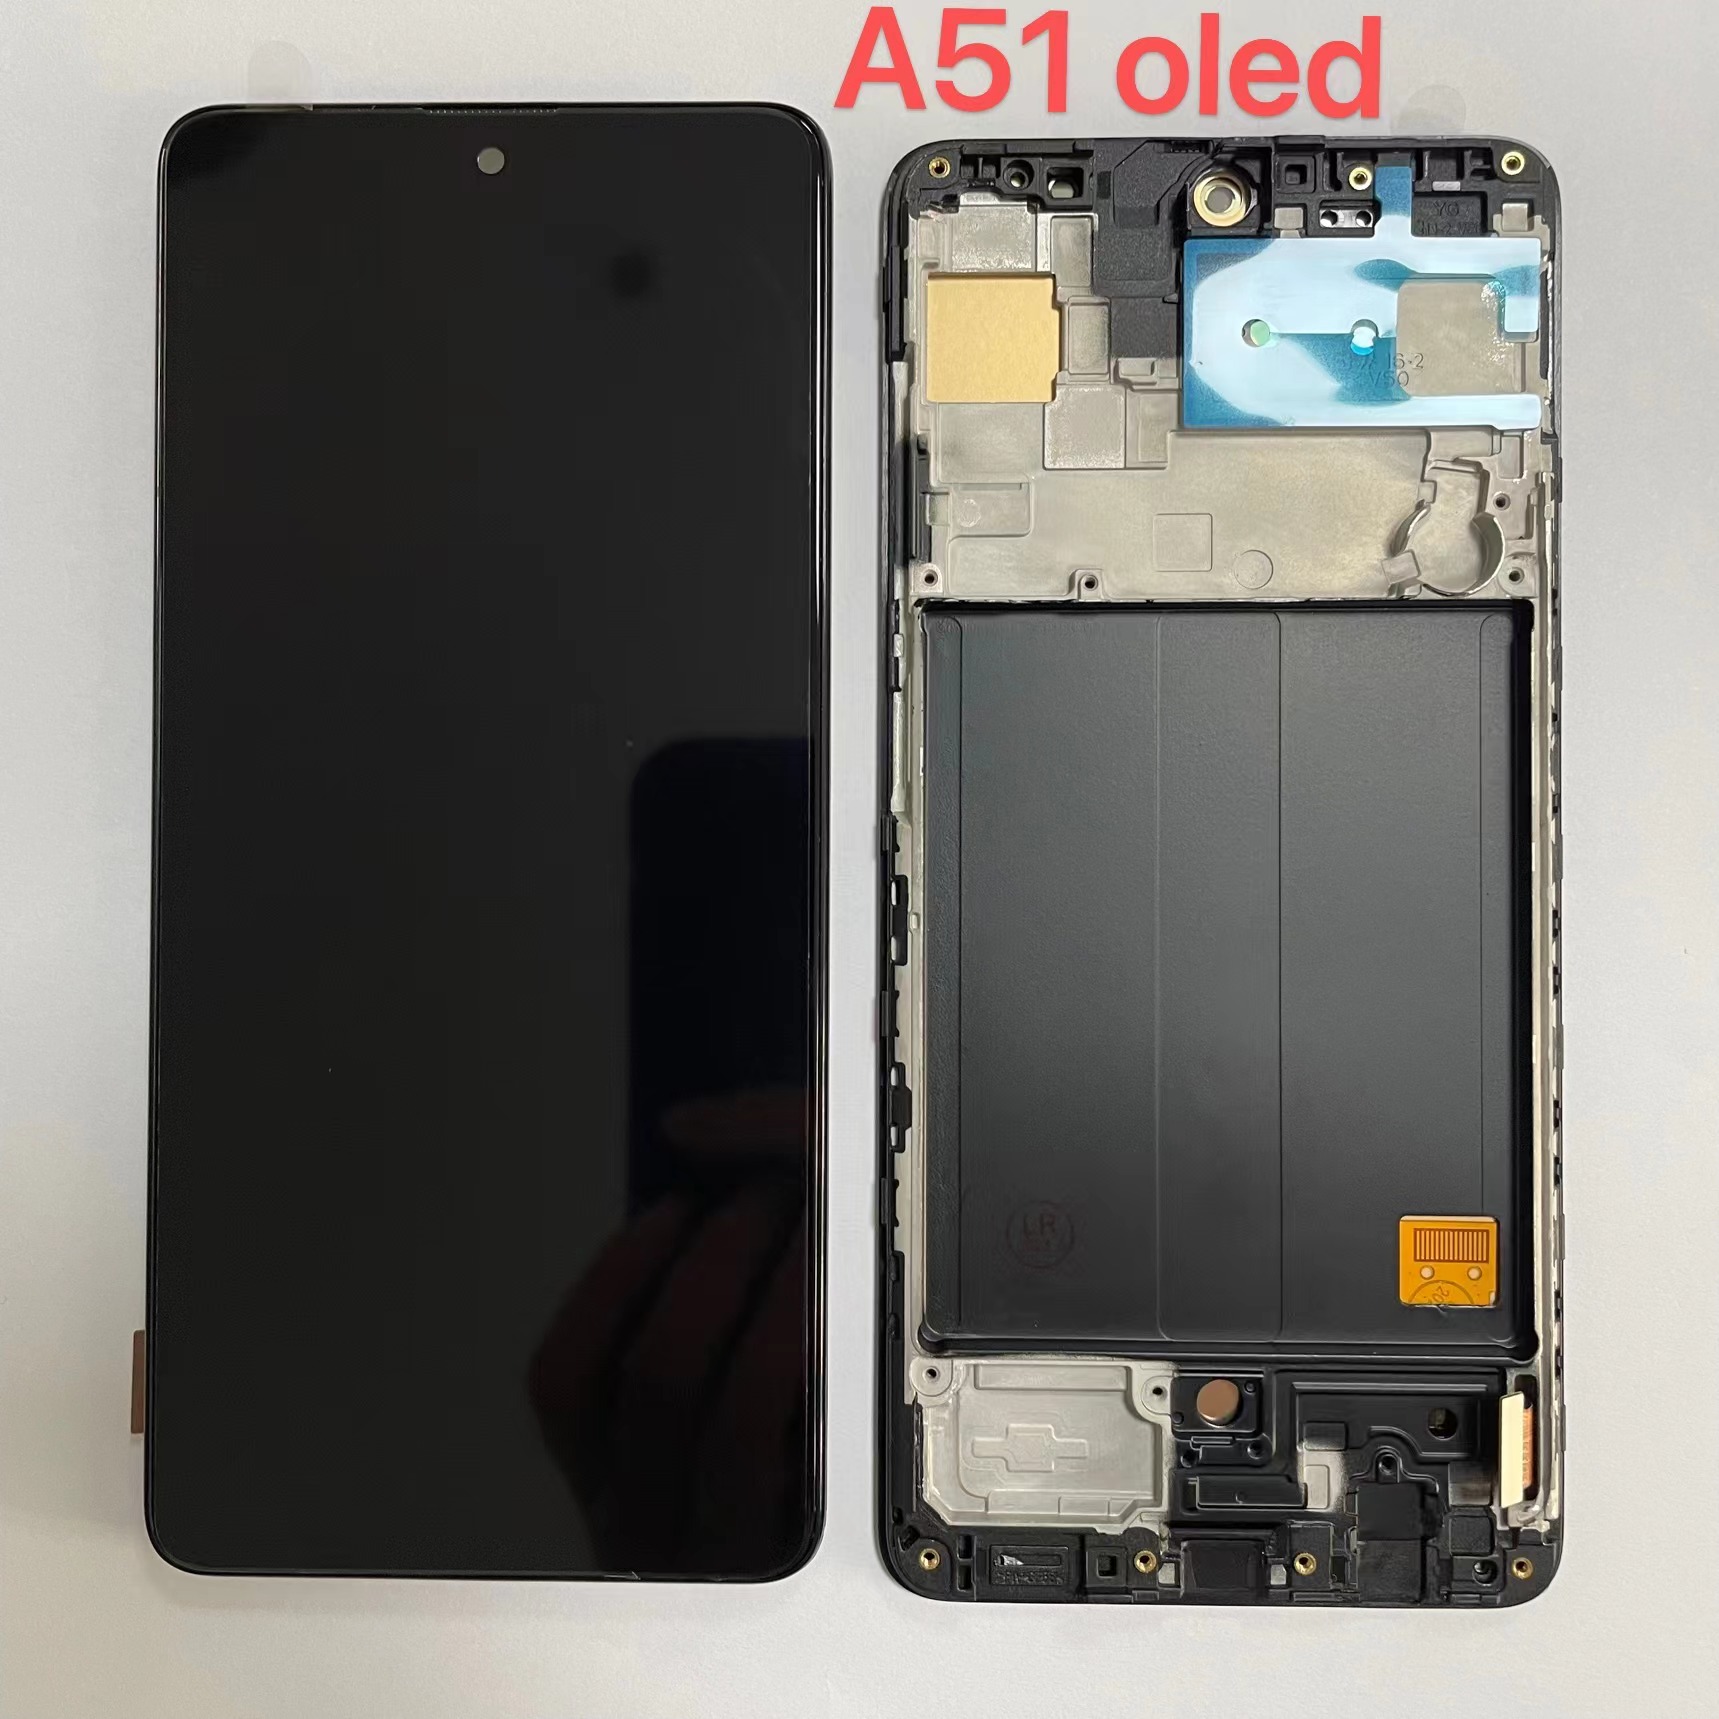 For Samsung A51 Oled ORi size WF Lcd Screen display and Lcd Screen replacement